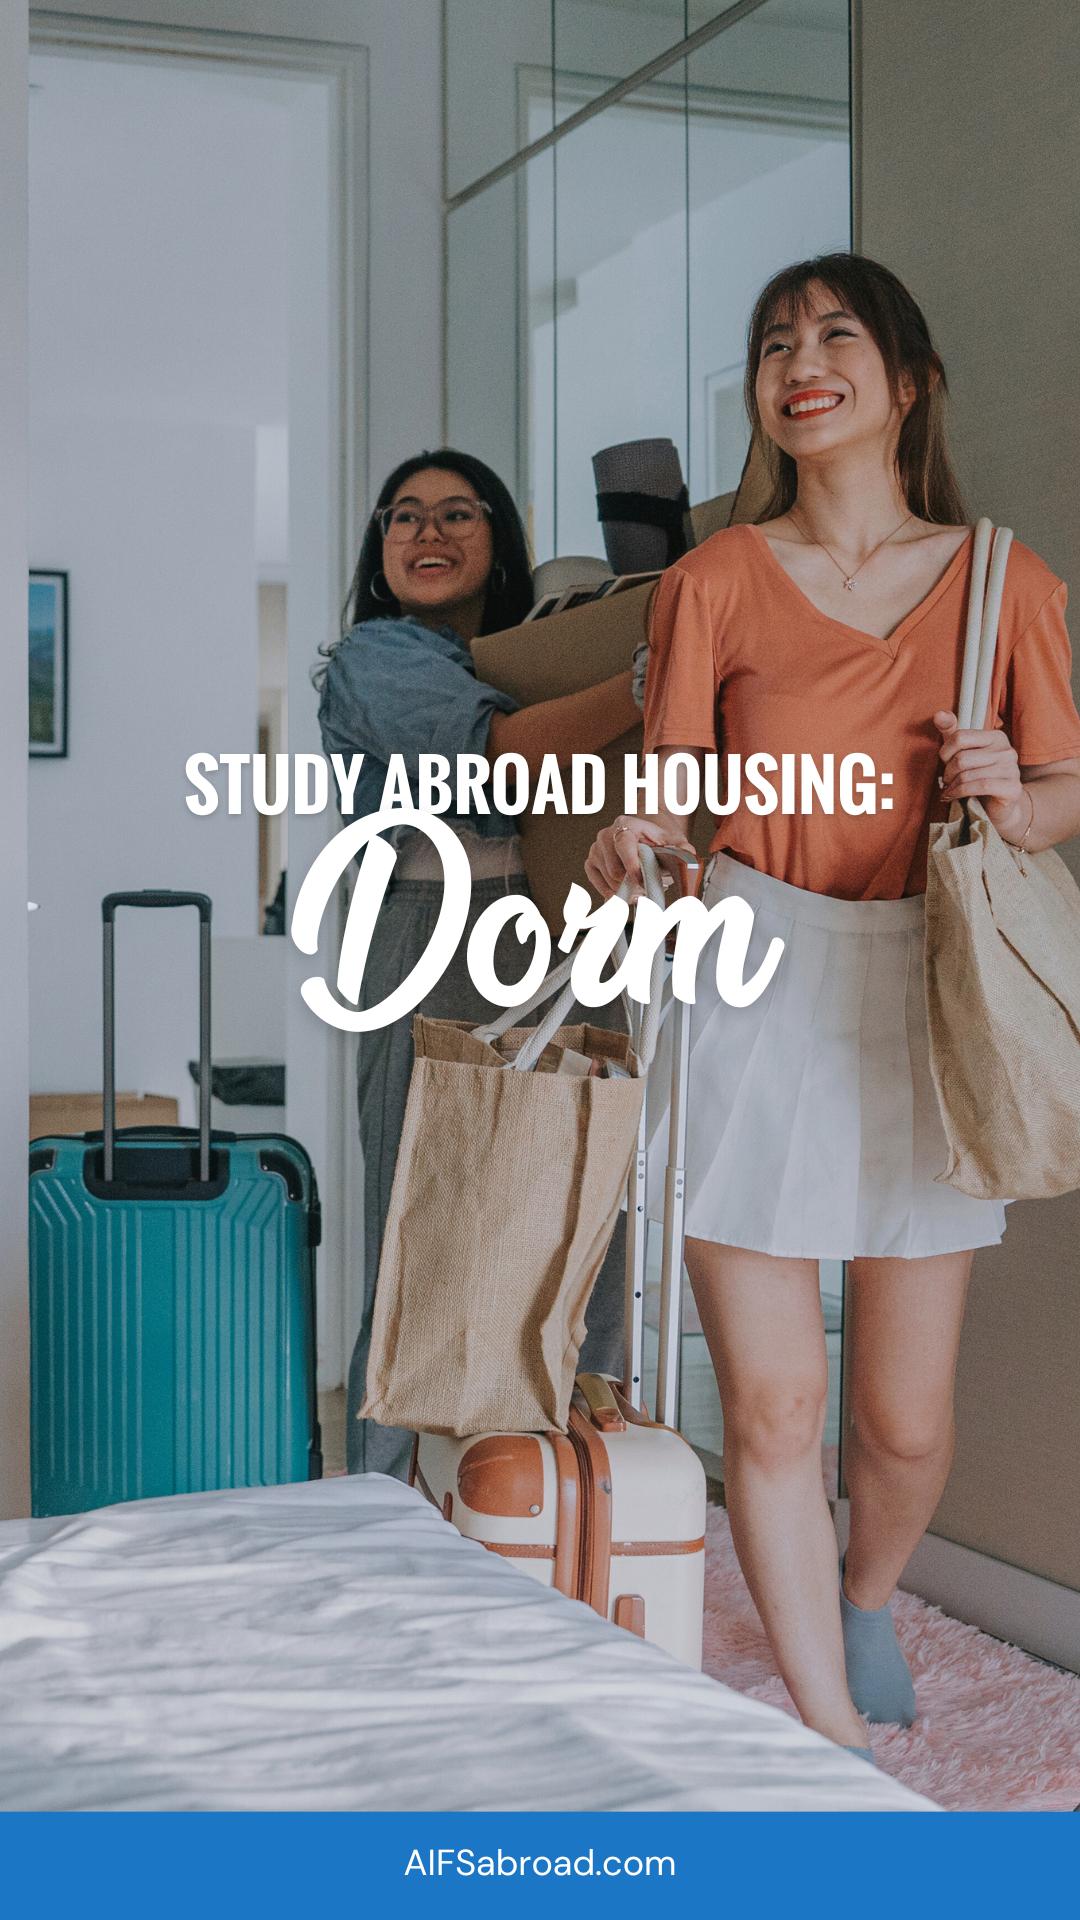 two young women walking into accommodations with text "study abroad housing: dorm" overlay